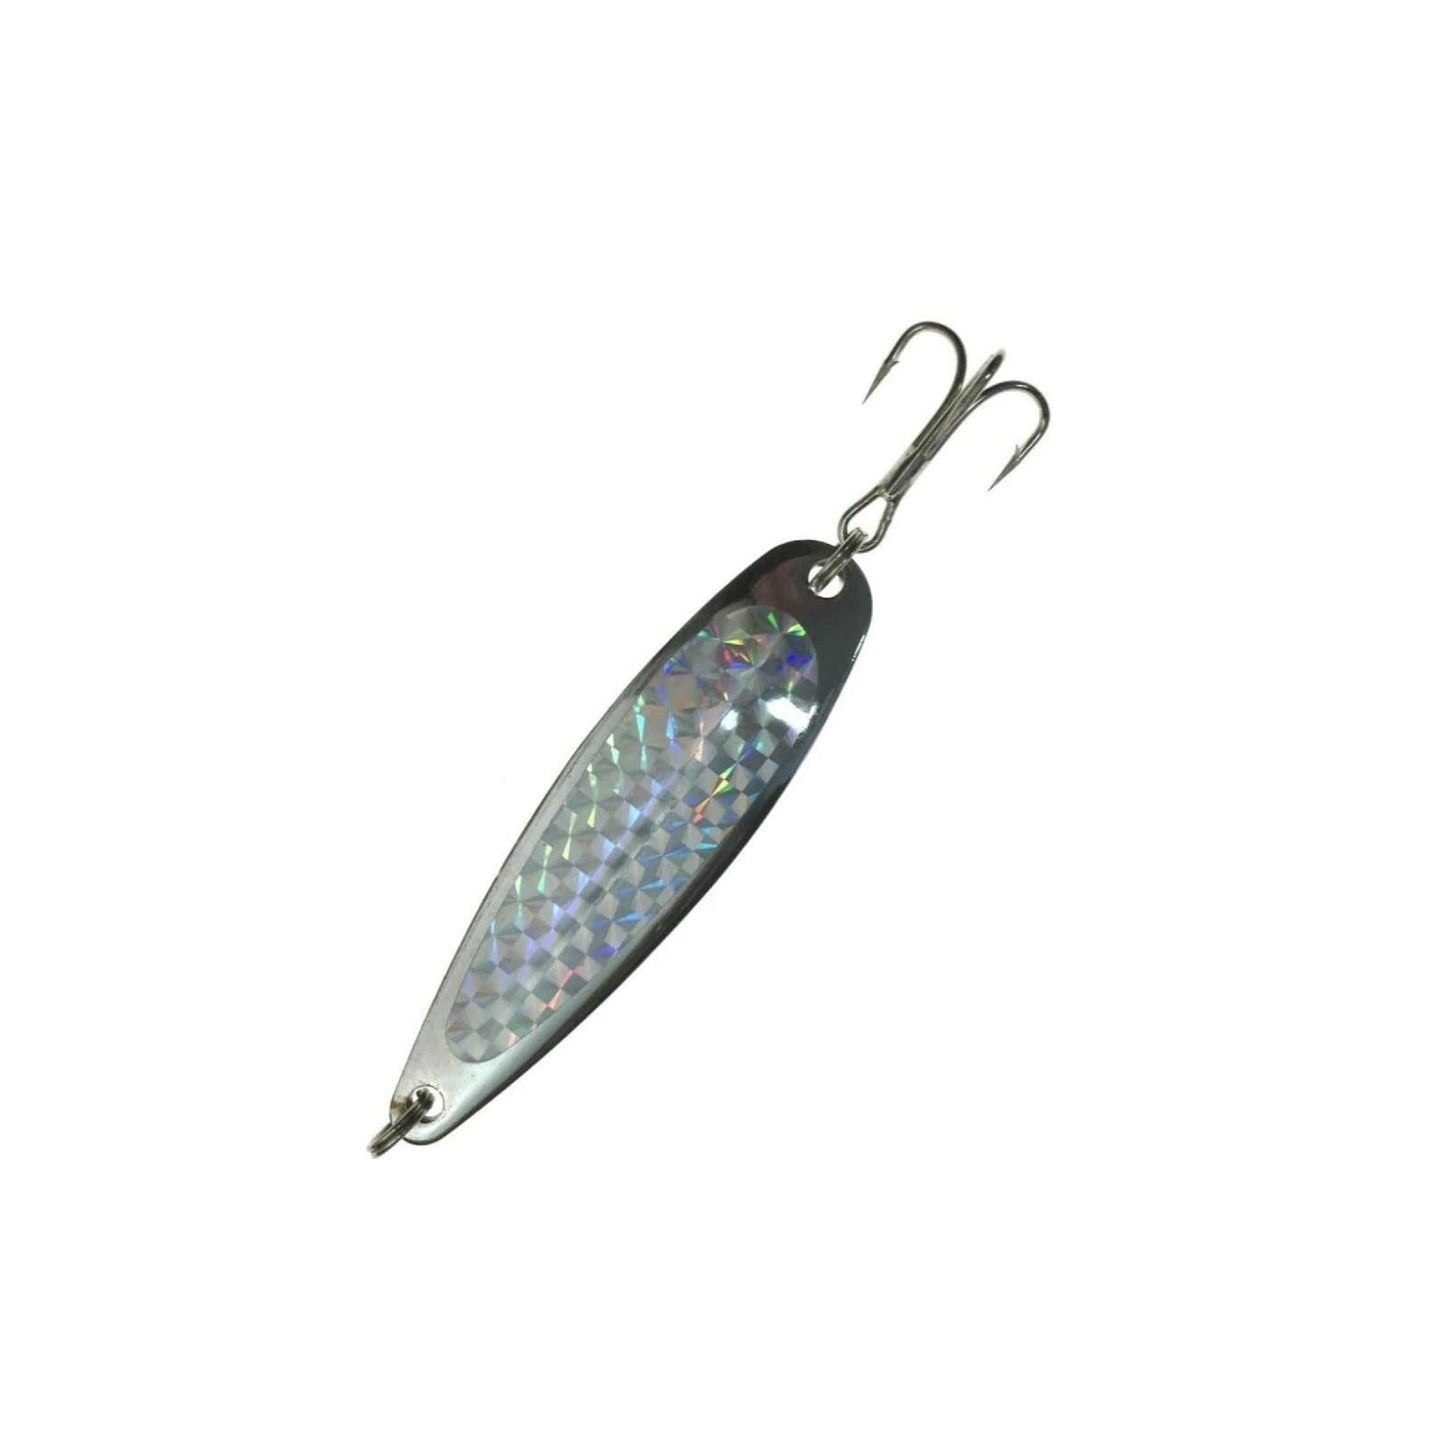 Fishing Spoon with a Treble Hook 3oz Silver